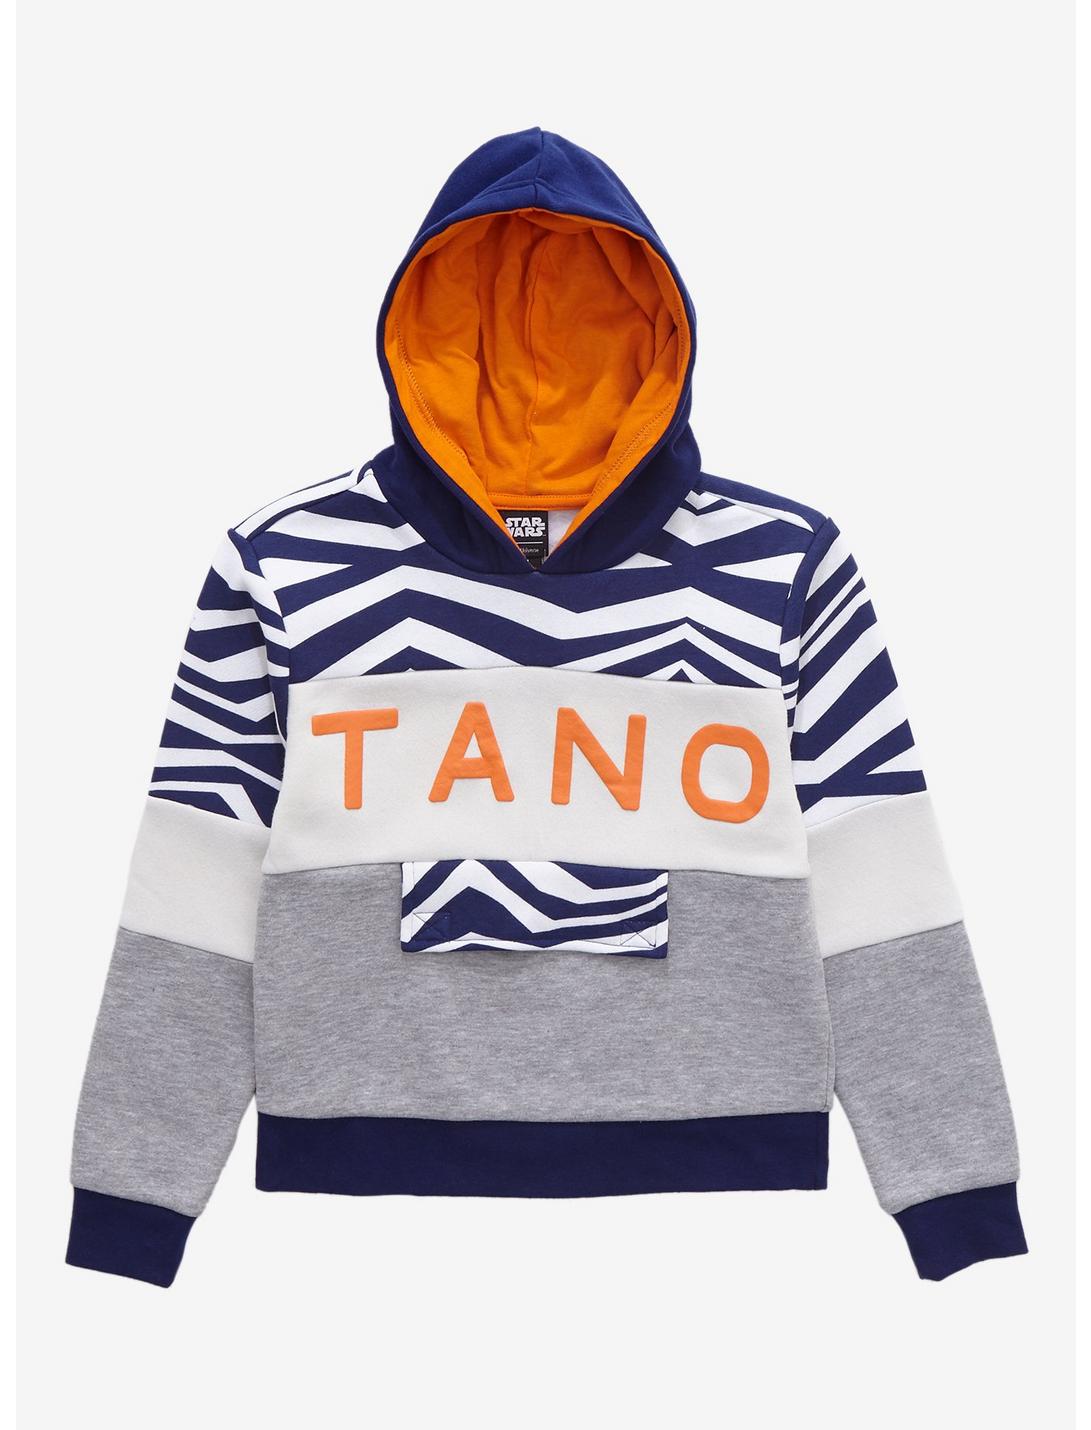 Our Universe Star Wars Ahsoka Tano Color-Block Youth Hoodie Her Universe Exclusive, MULTI, hi-res